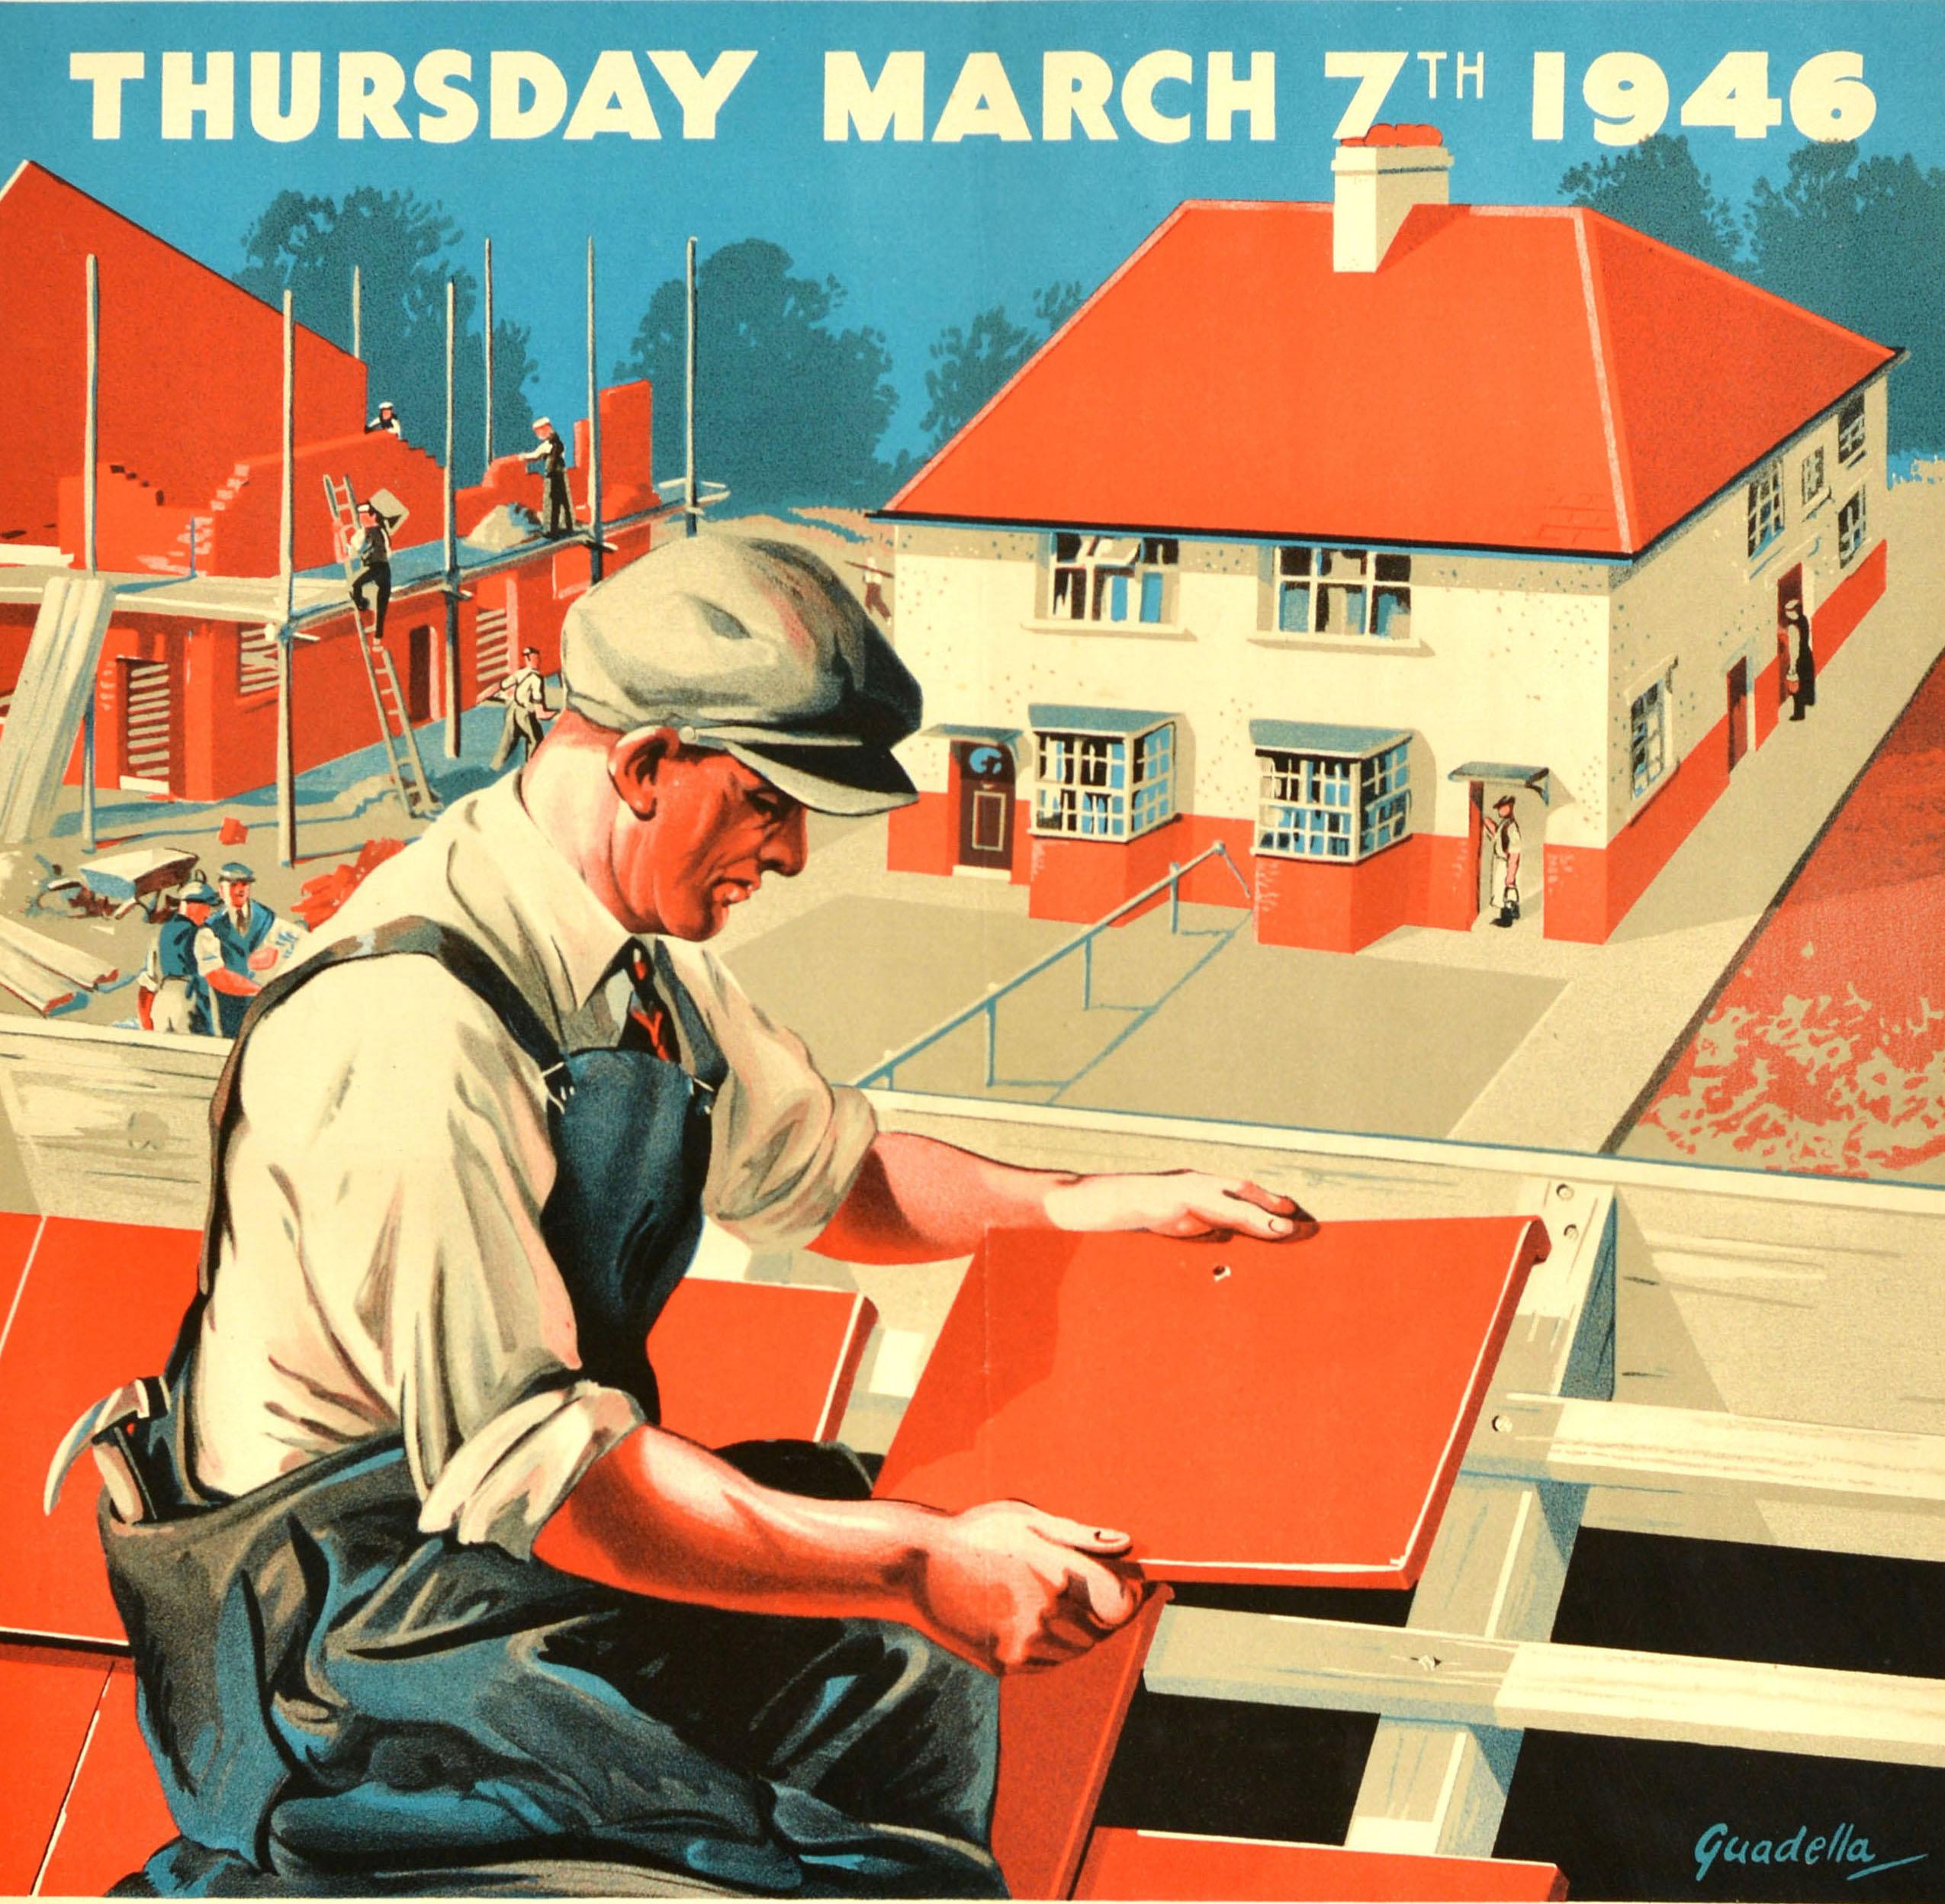 Original vintage London County Council poster - LCC Election Thursday 7 March 1946 We've had enough socialist promises Now let's have houses Vote Conservative - featuring an illustration of a worker installing roof tiles, with other workers